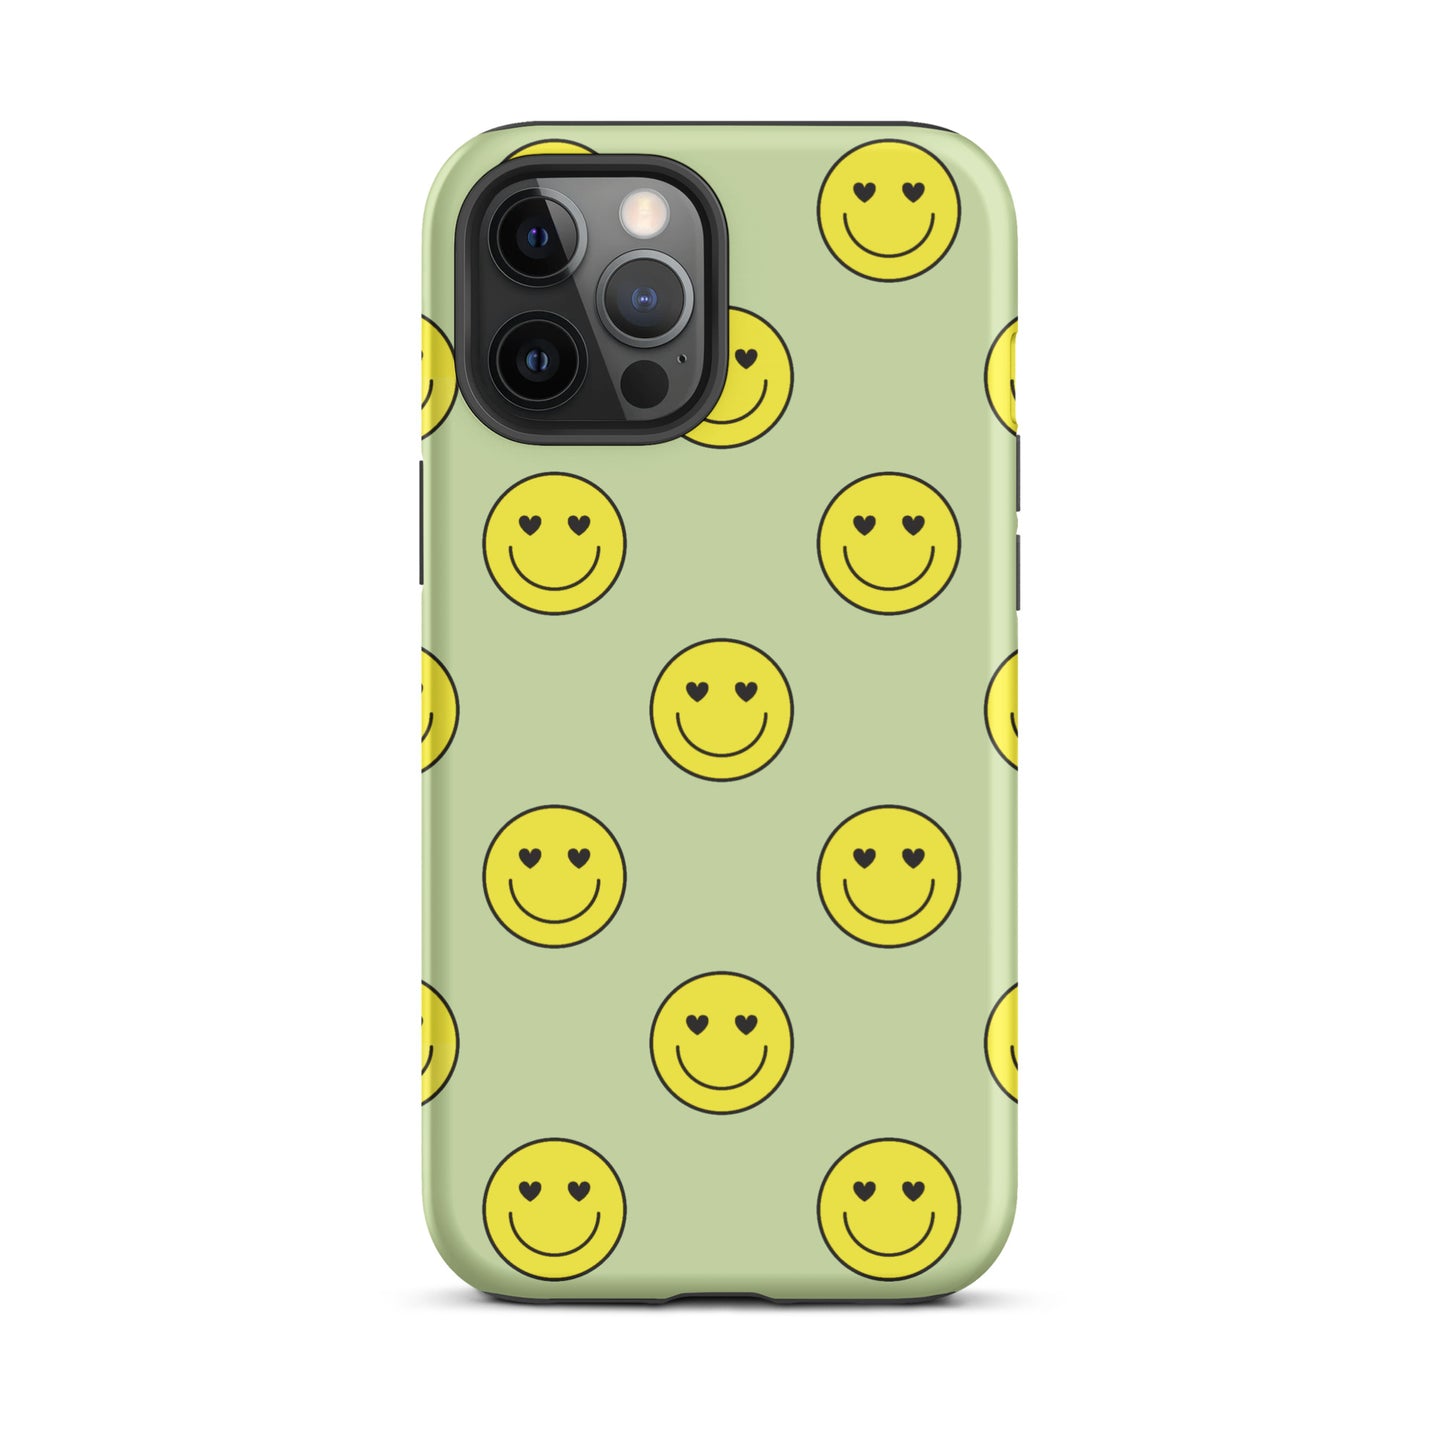 Neon Smiley Faces iPhone Case iPhone 12 Pro Max Matte